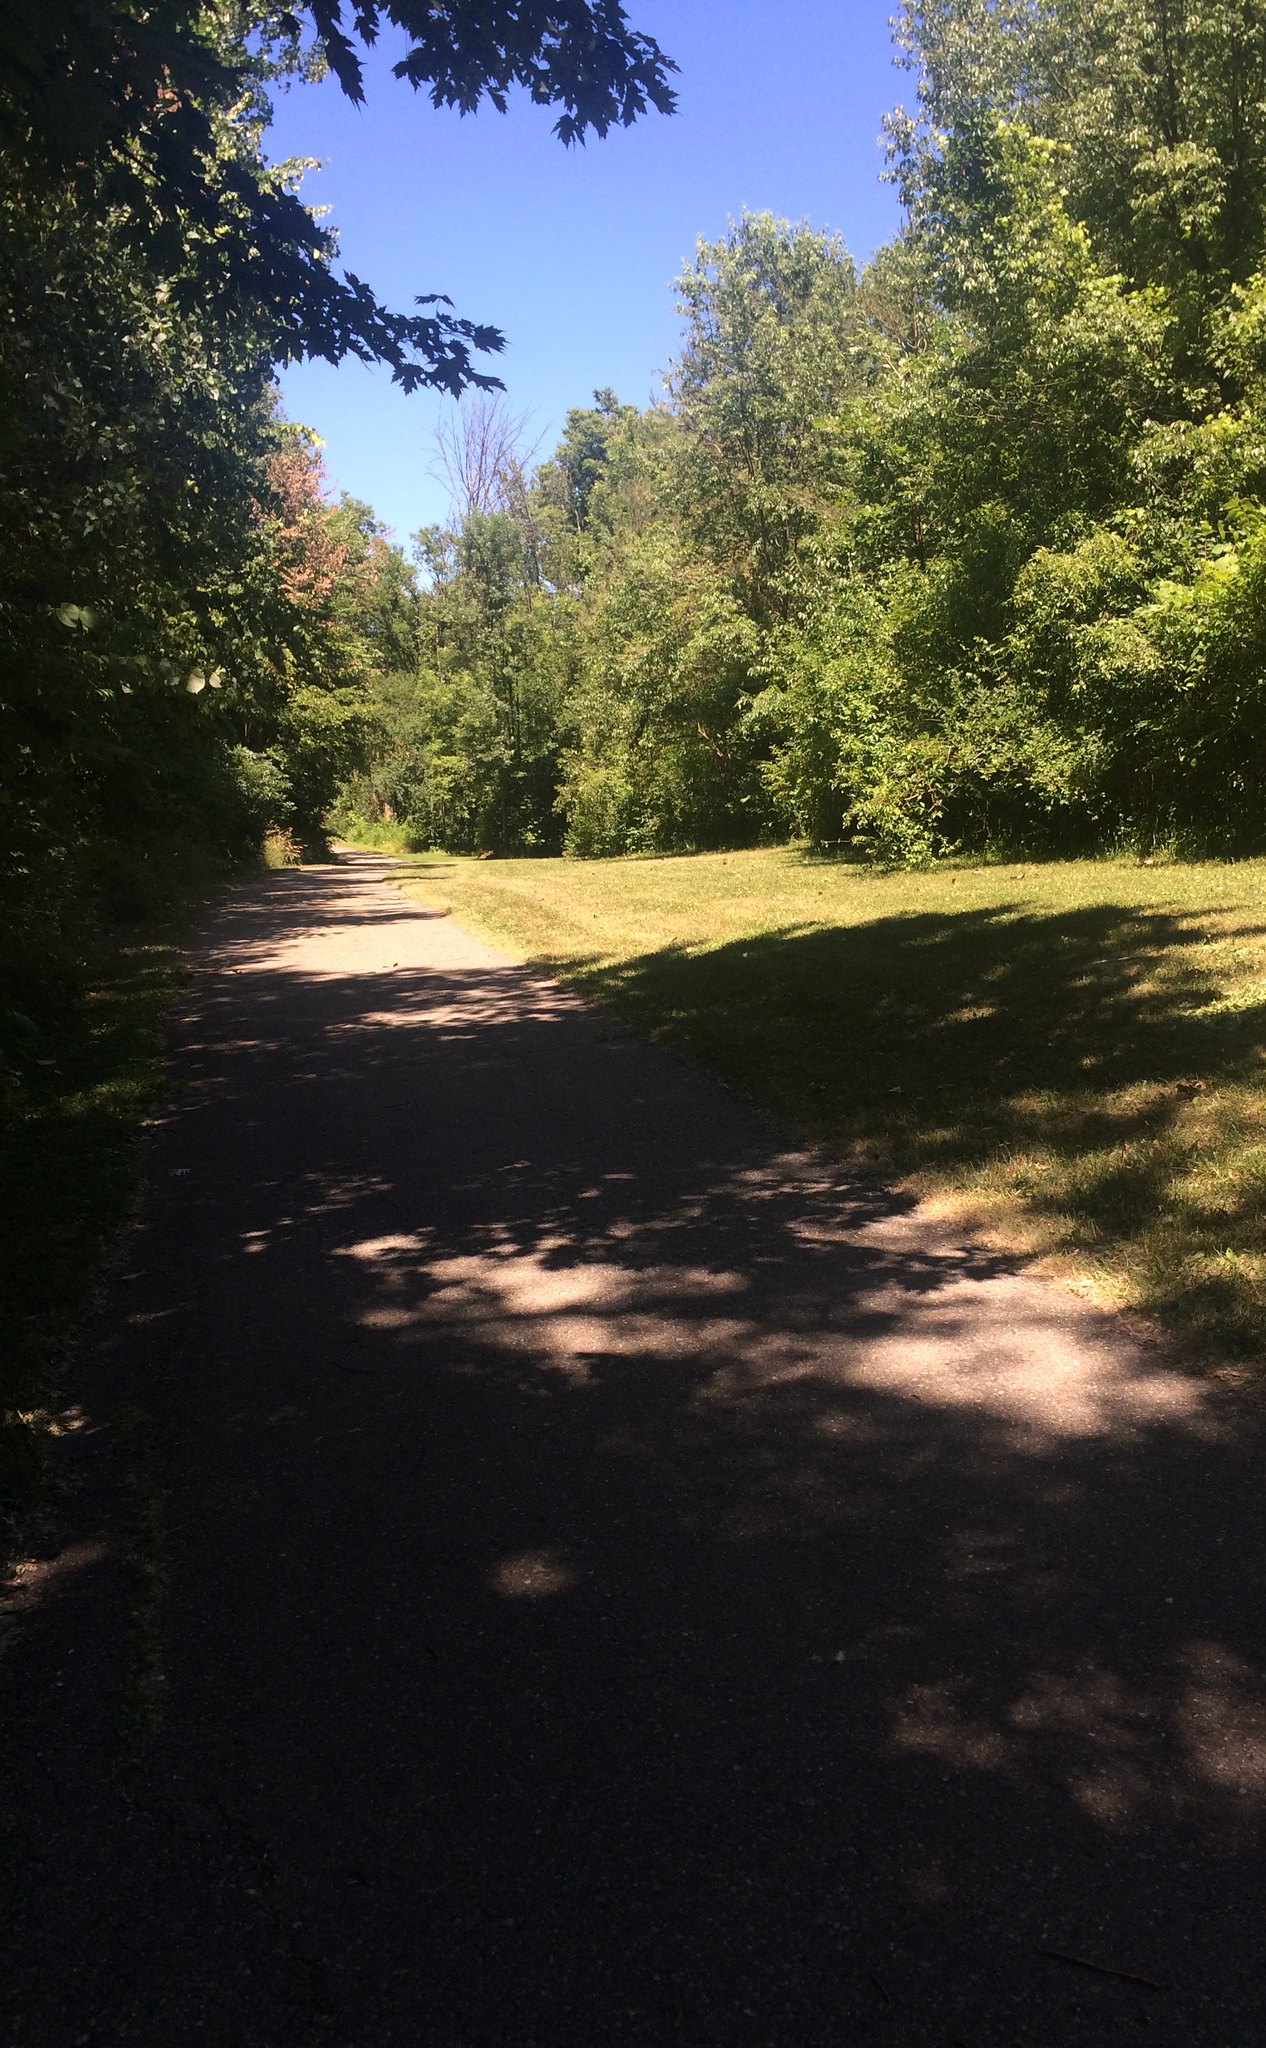 Funding Awarded To Construct Trail From MSU To Lake Lansing